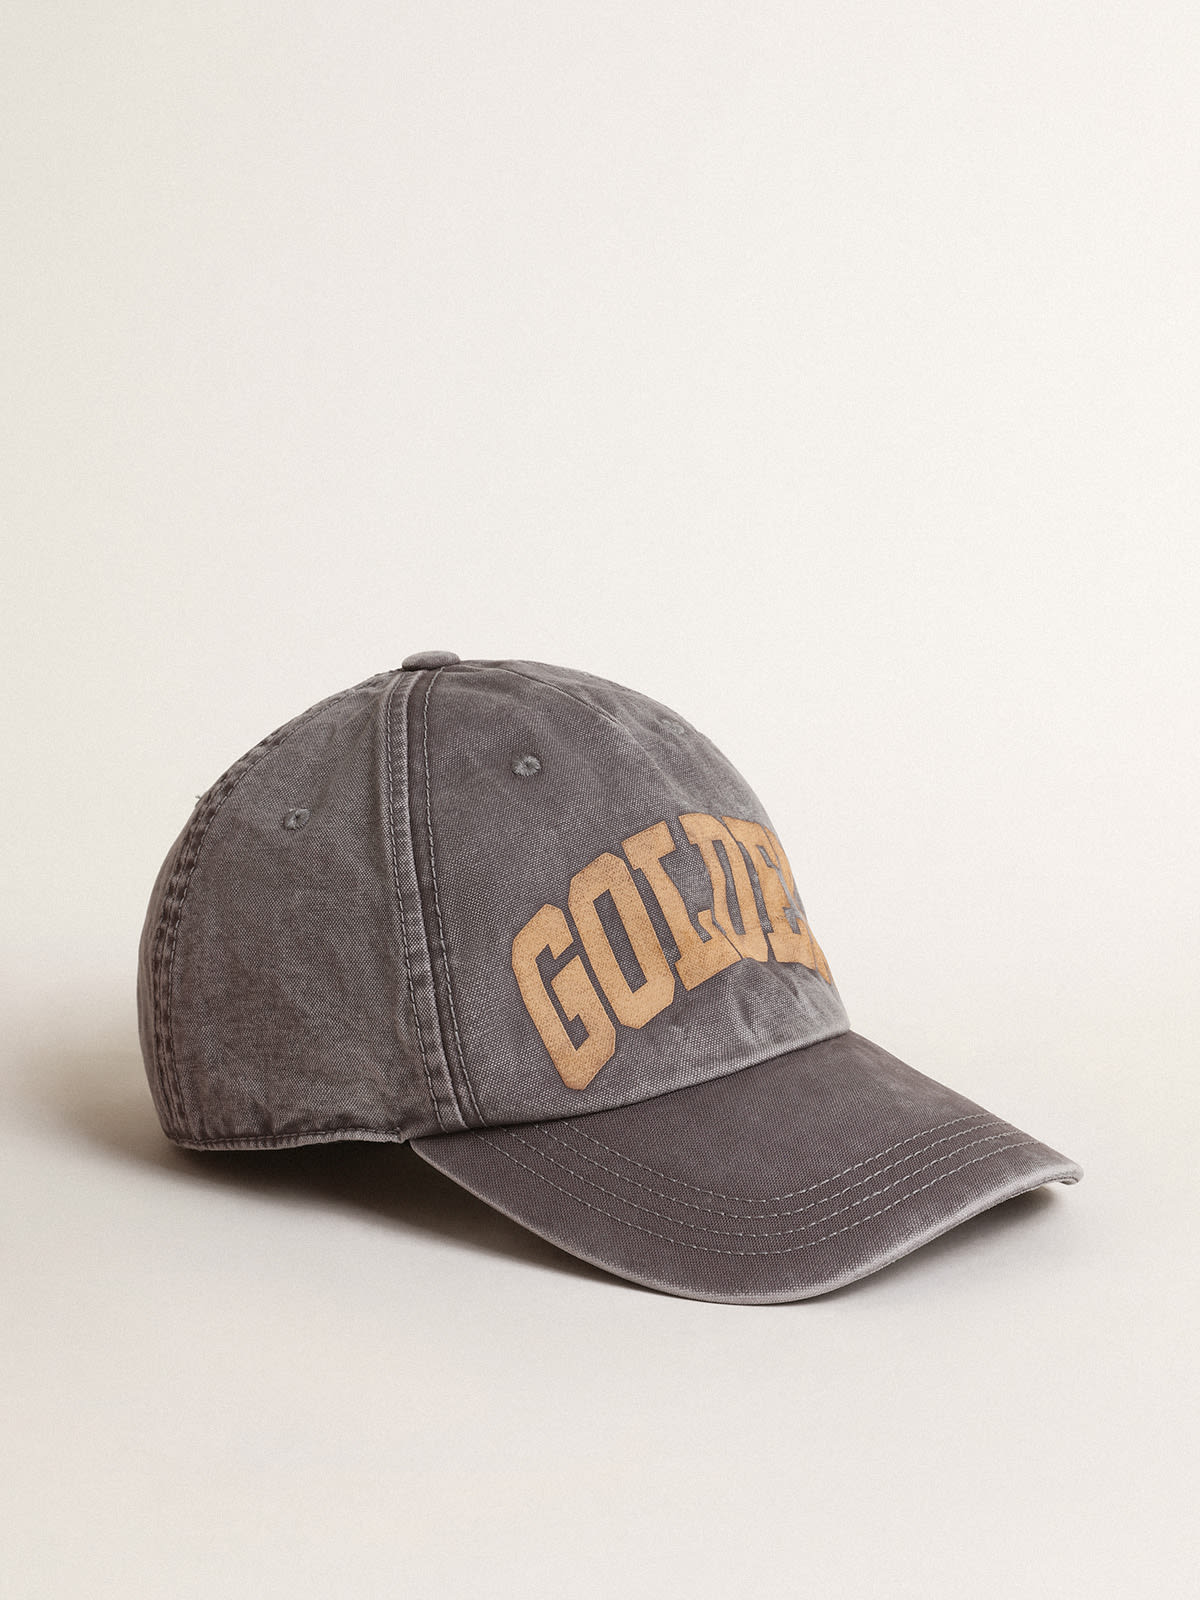 Golden Goose - Hat in lilac-gray cotton with Golden lettering on the front in 